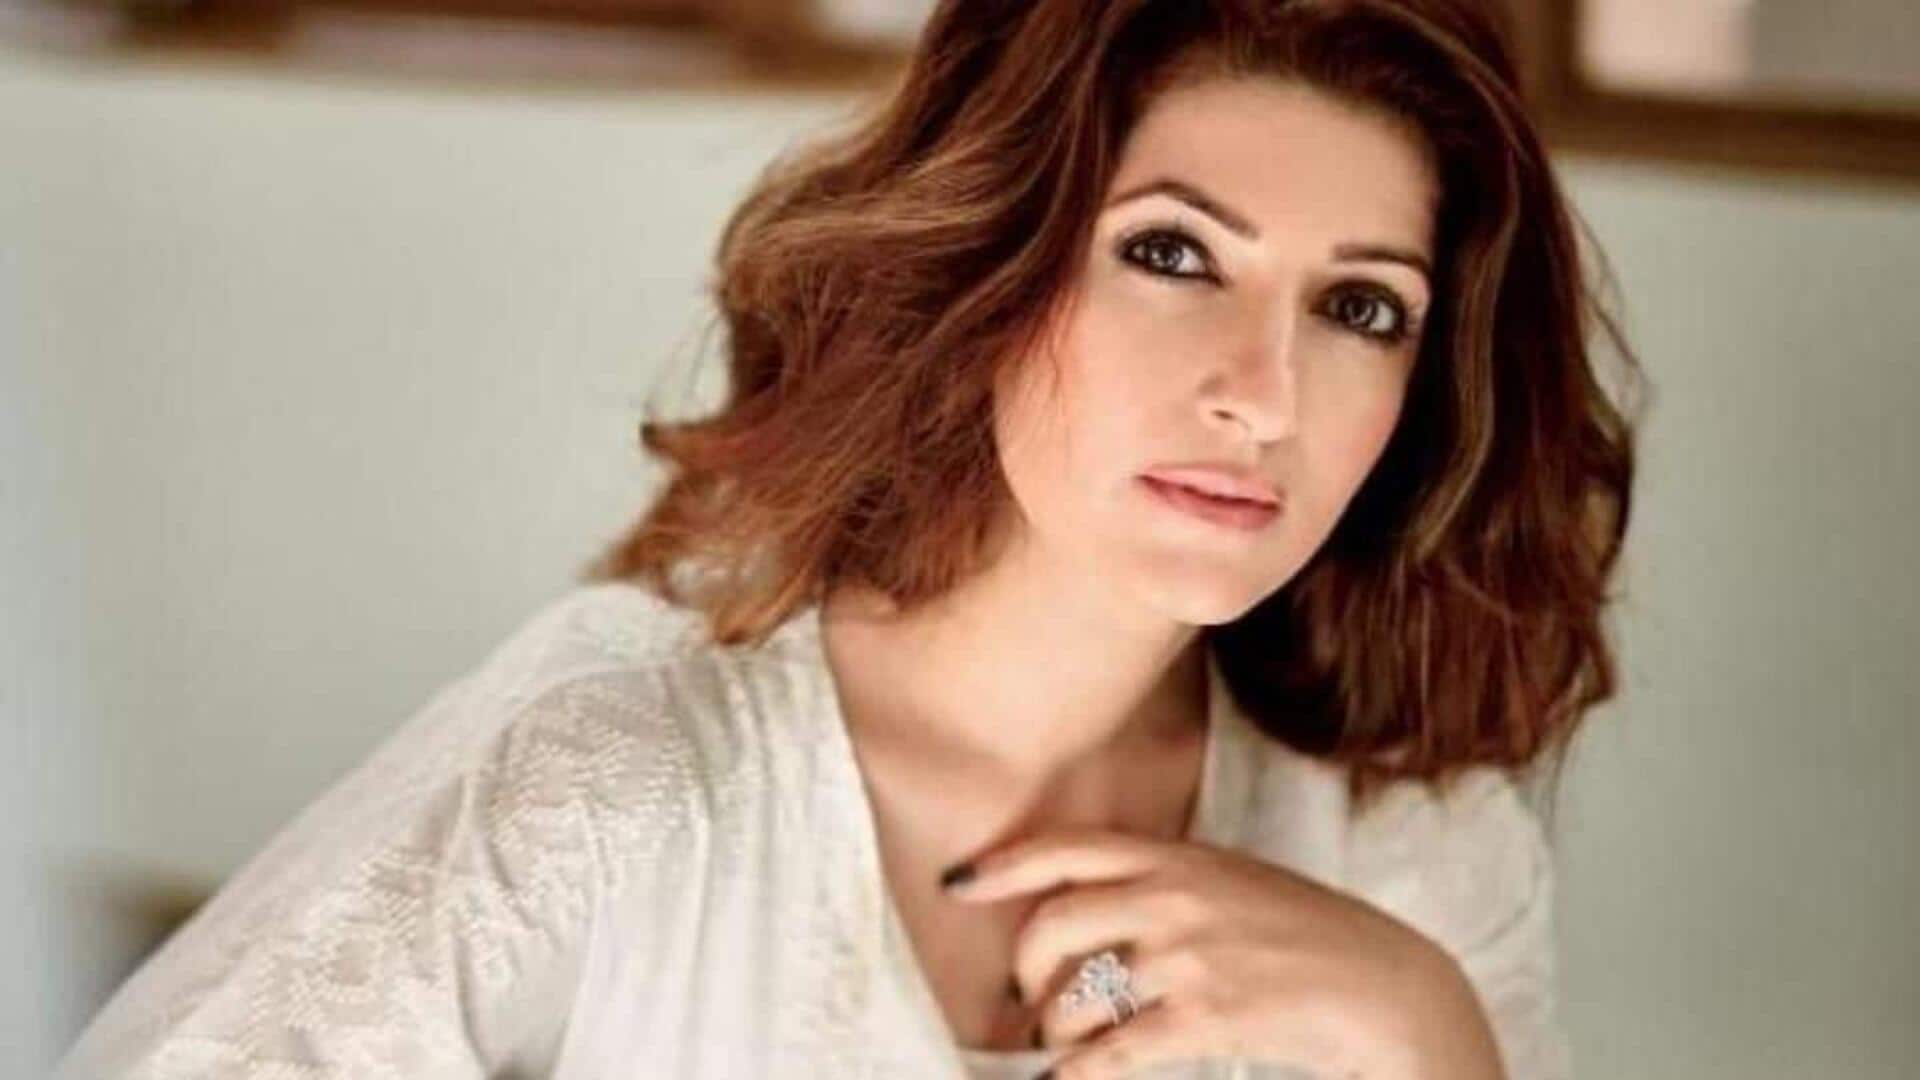 Twinkle Khanna reacts to reports of attending Dawood Ibrahim's parties